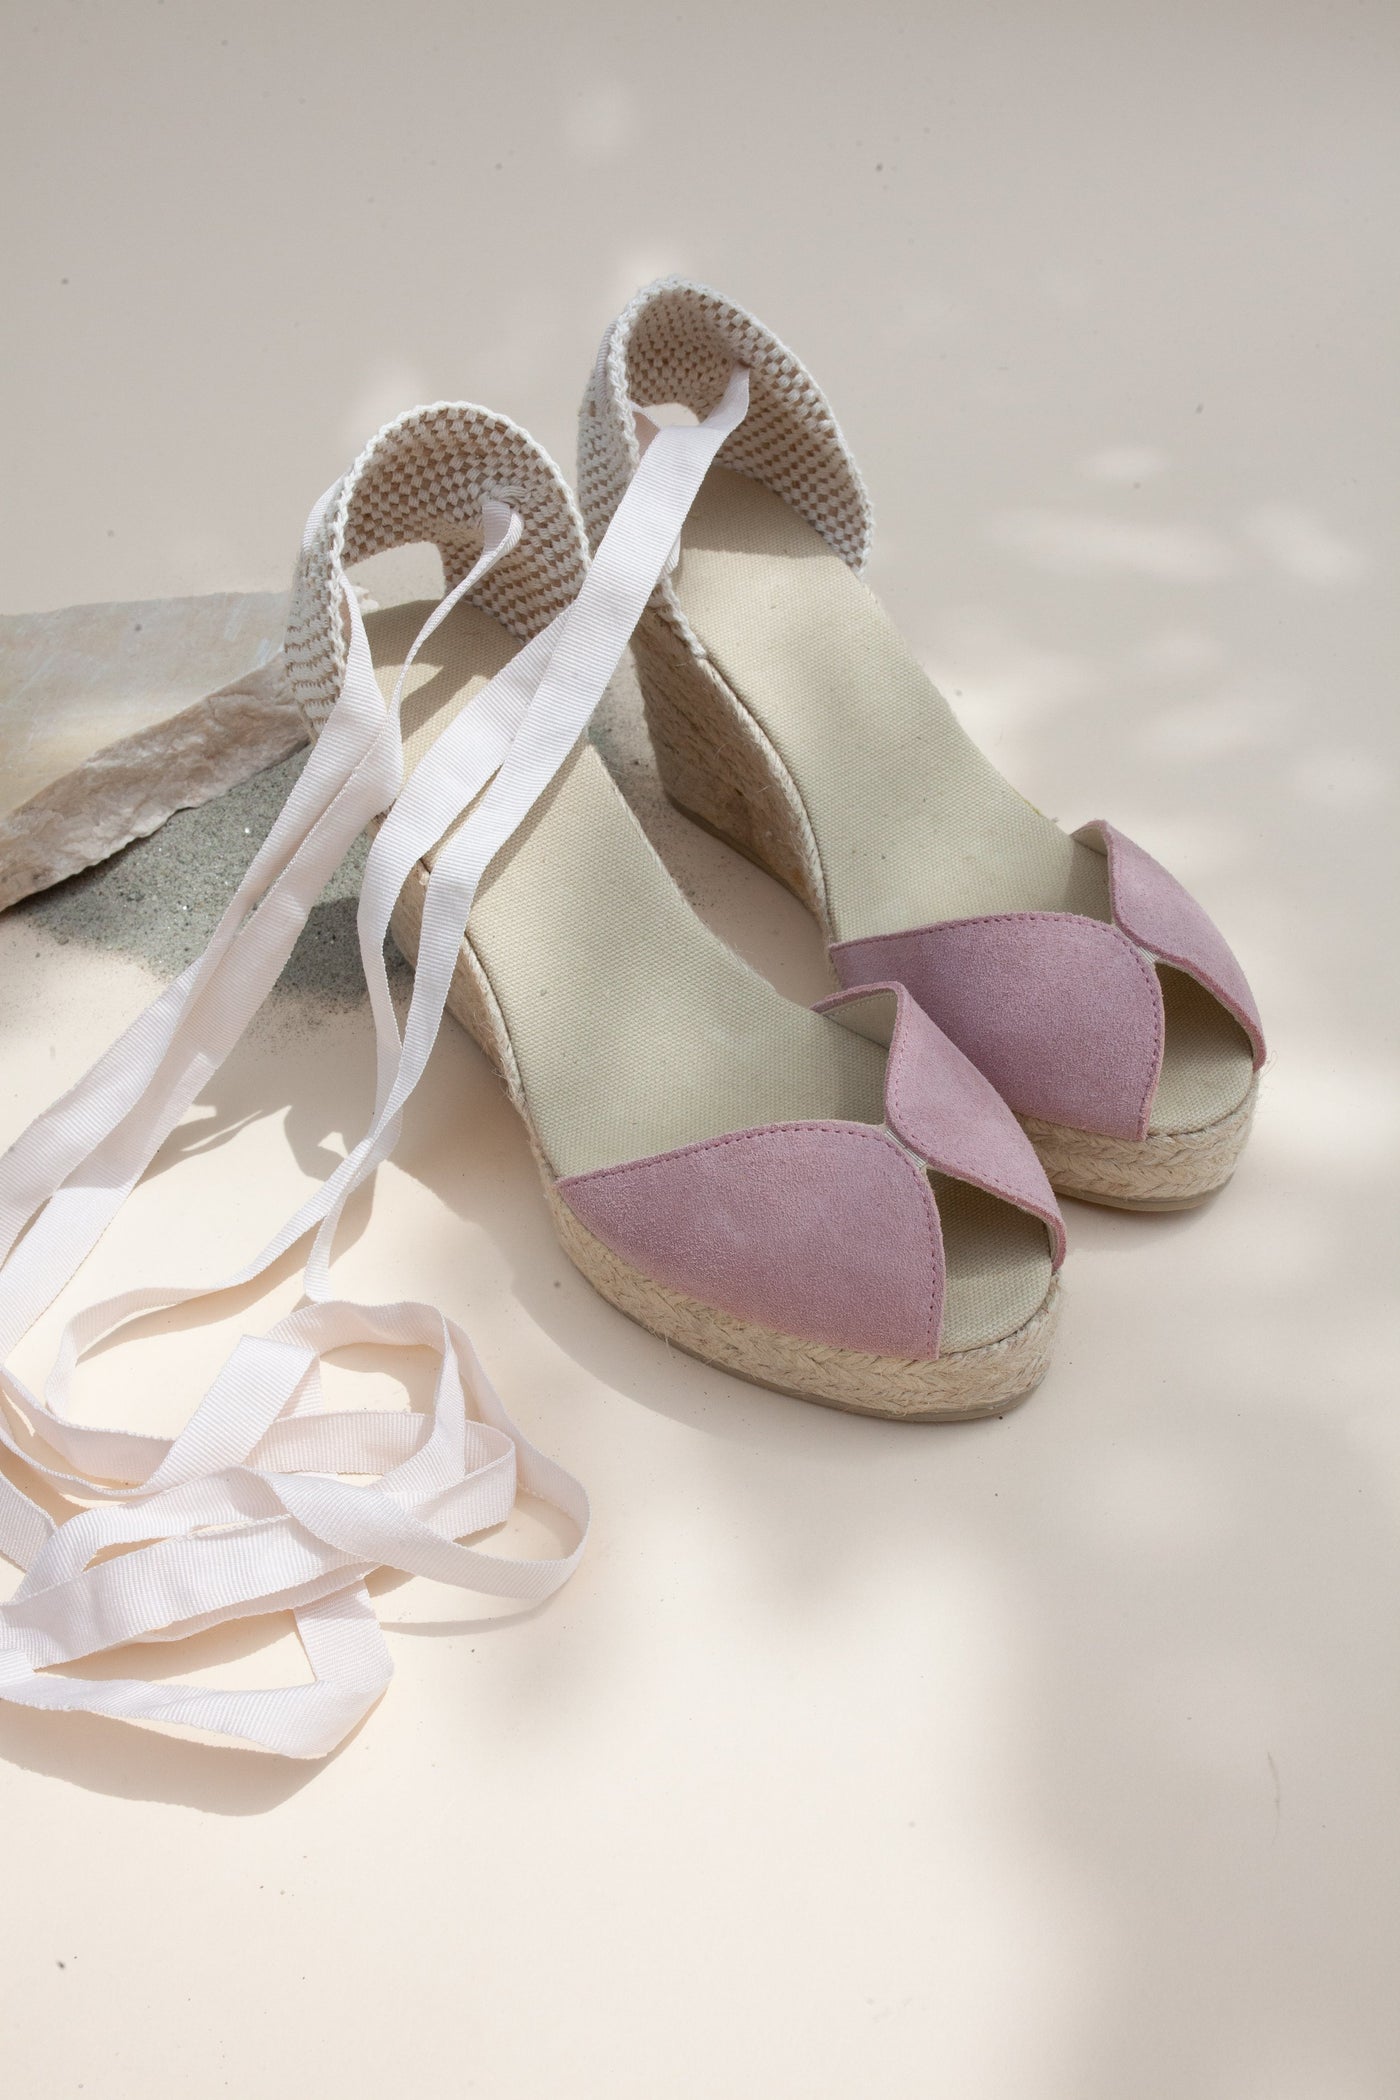 The Soft Pink Peep Toe Wedges